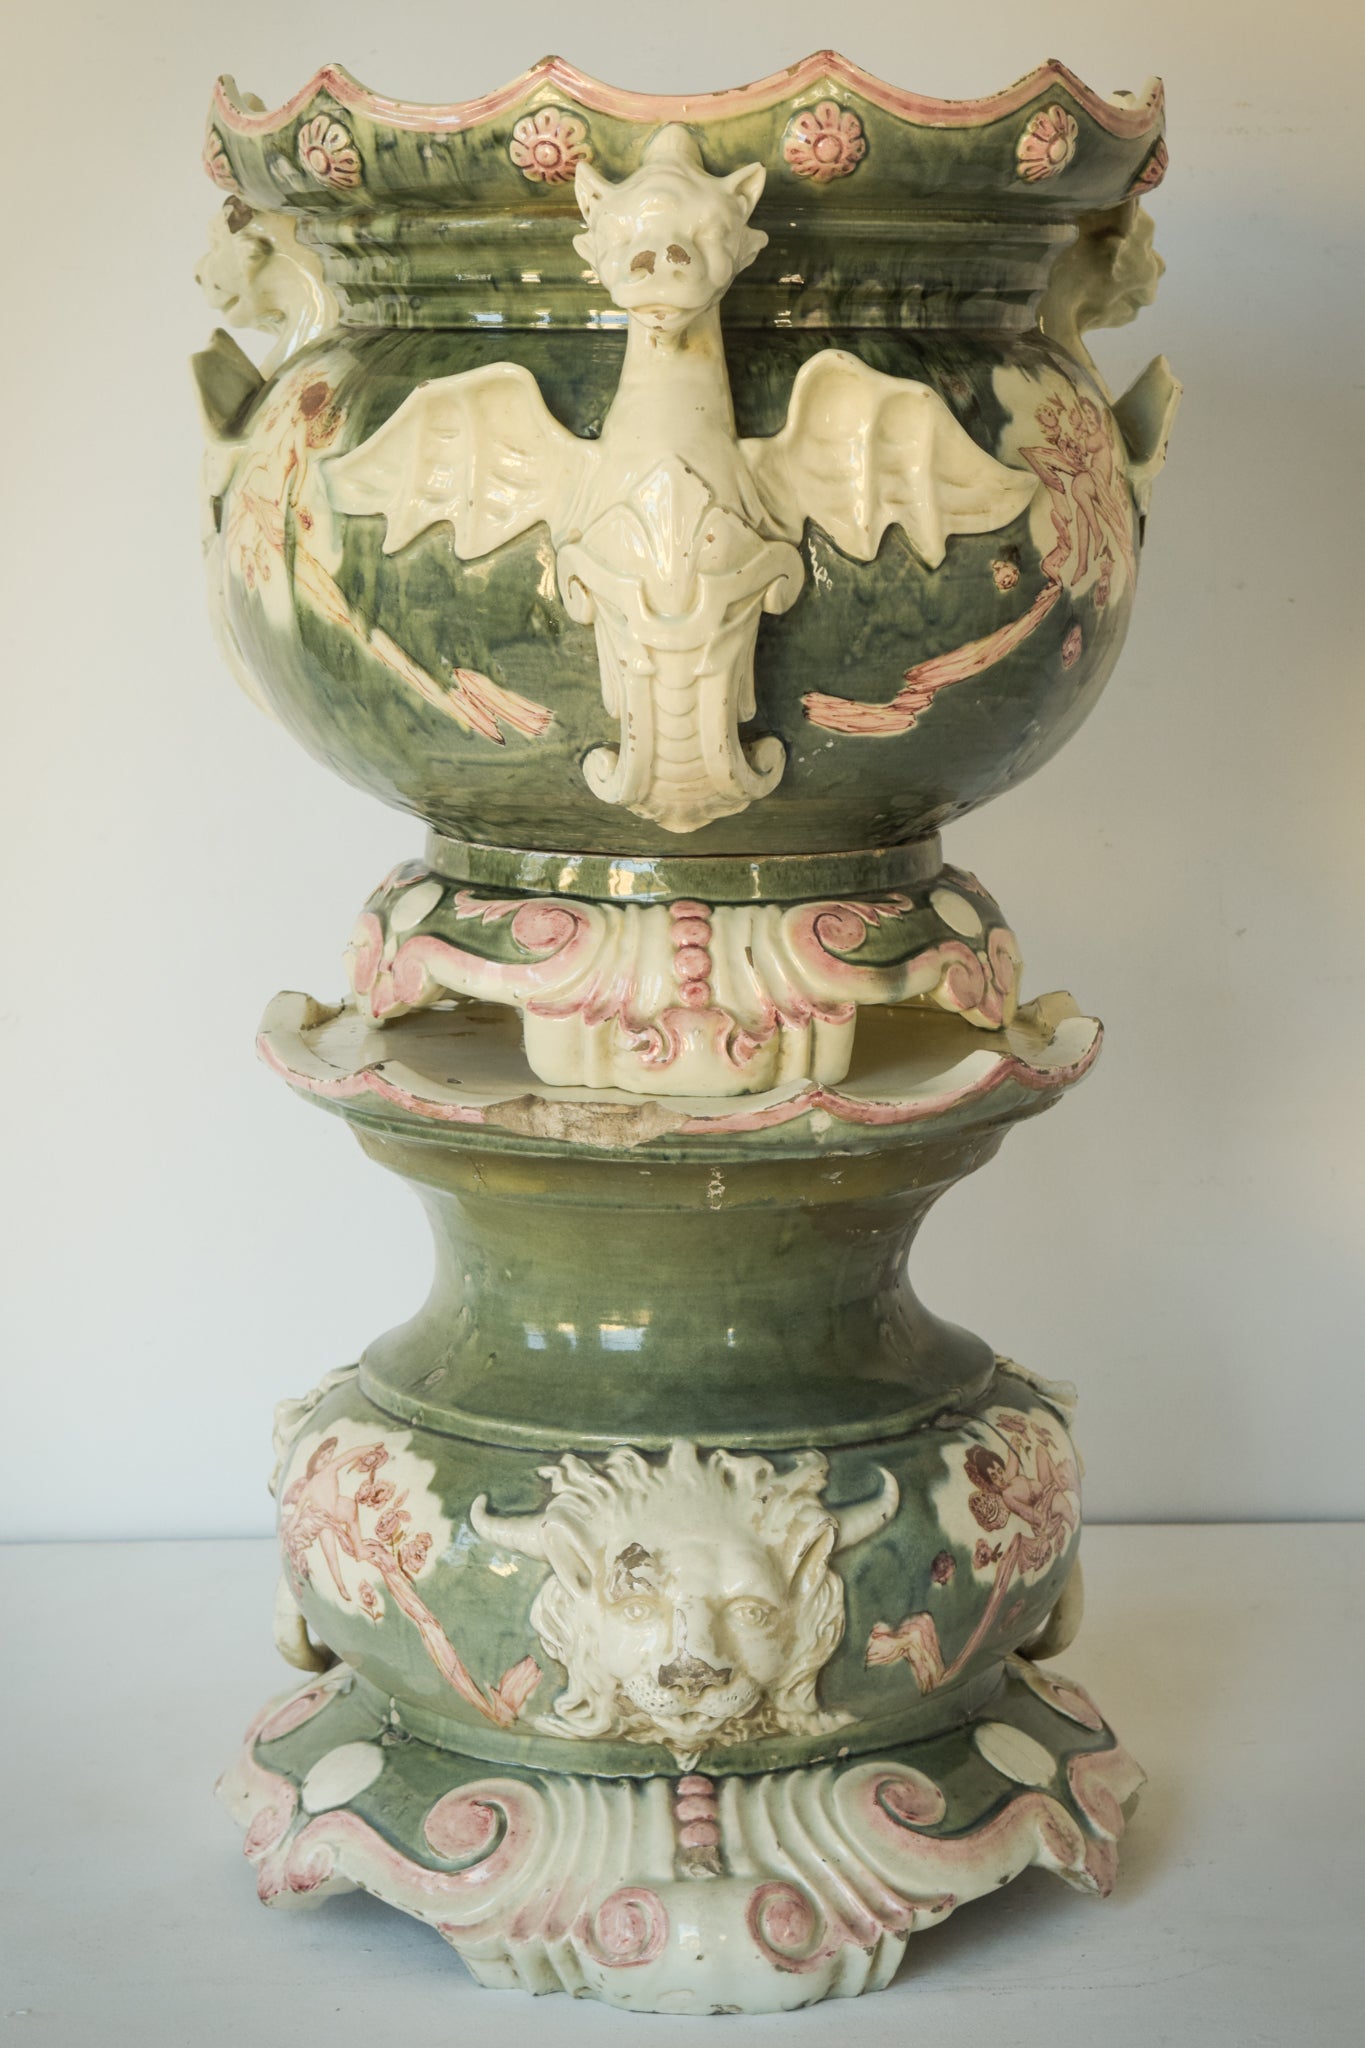 Massive Magnificent Decorative Jardinière With Lots of Character